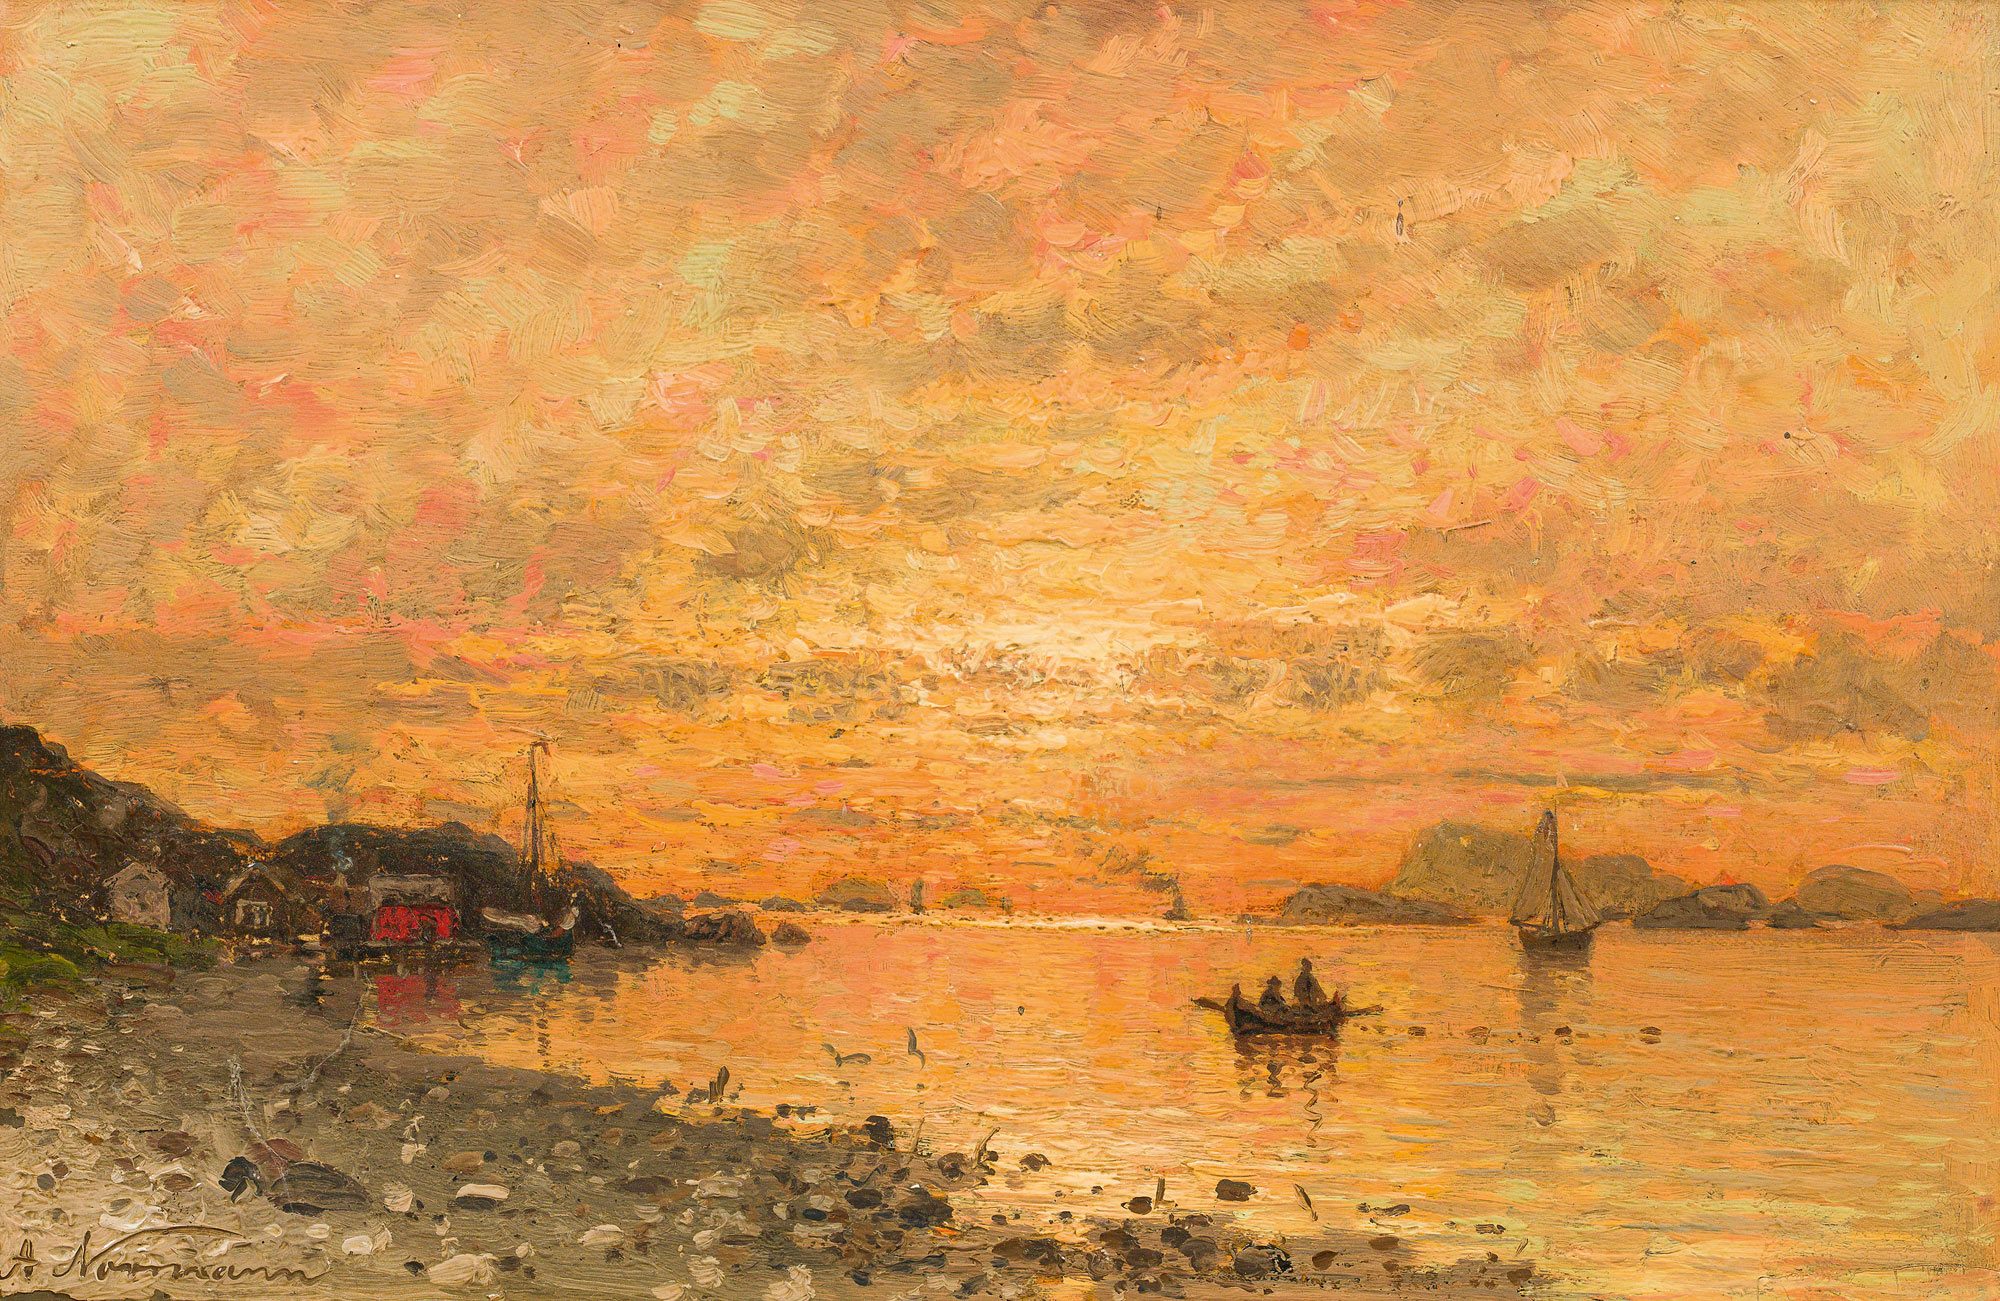 Adelsteen NormannFjord at sunsetoil on canvas22.5 x 33.5 cmsigned on the lower left: A